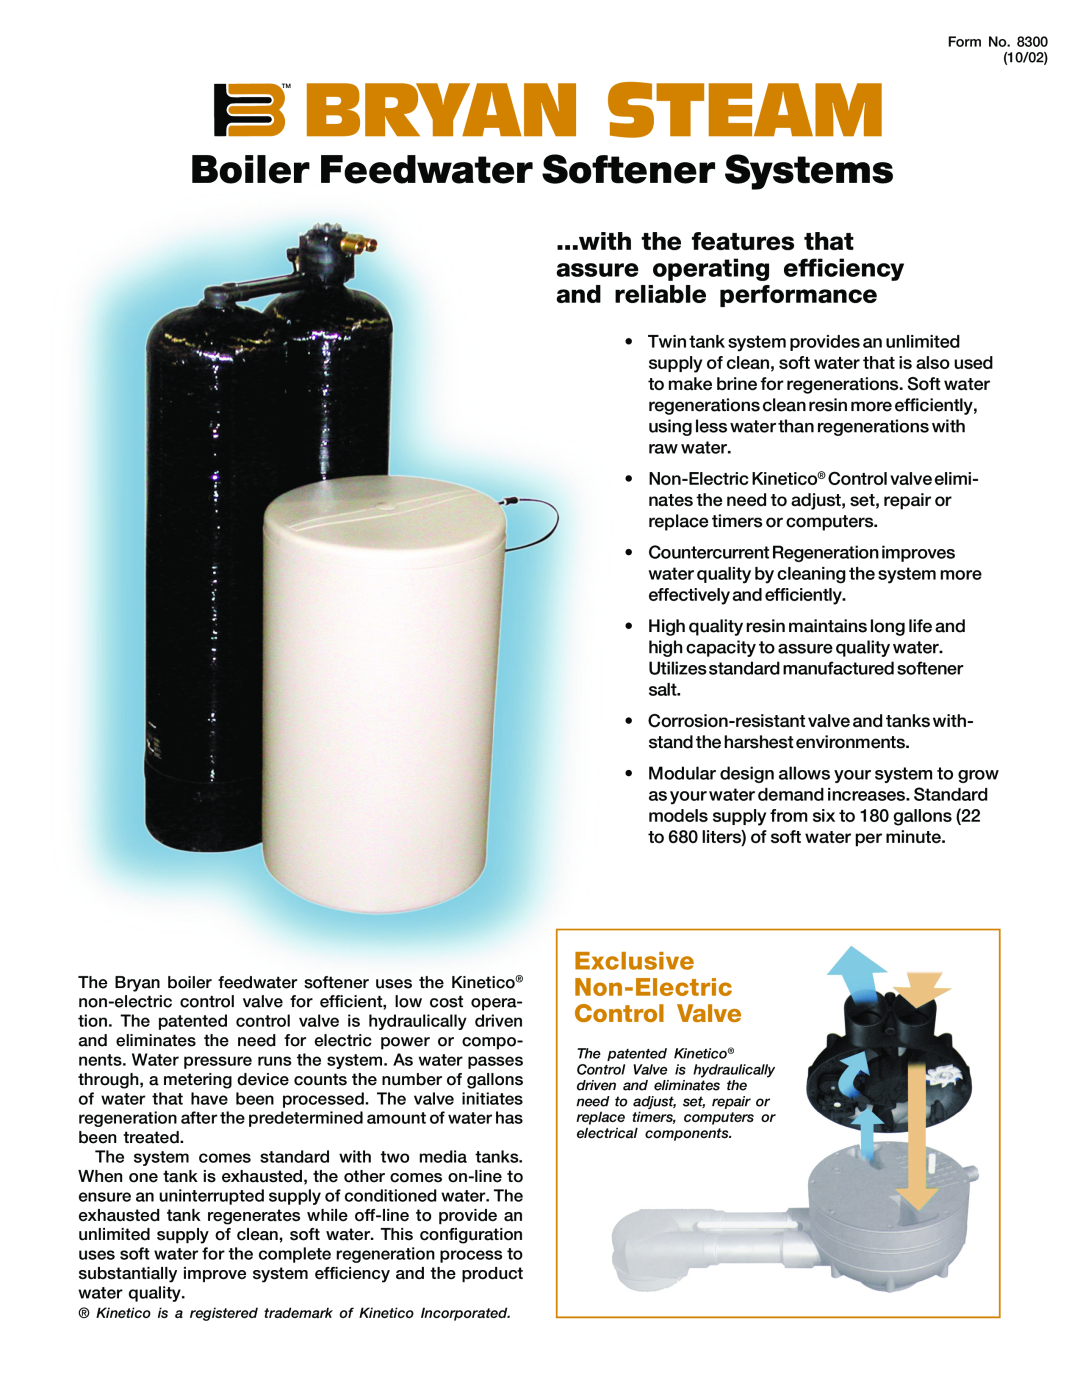 Bryan Boilers BKS6000 manual Tm Bryan Steam, Boiler Feedwater Softener Systems, Exclusive Non-Electric Control Valve 